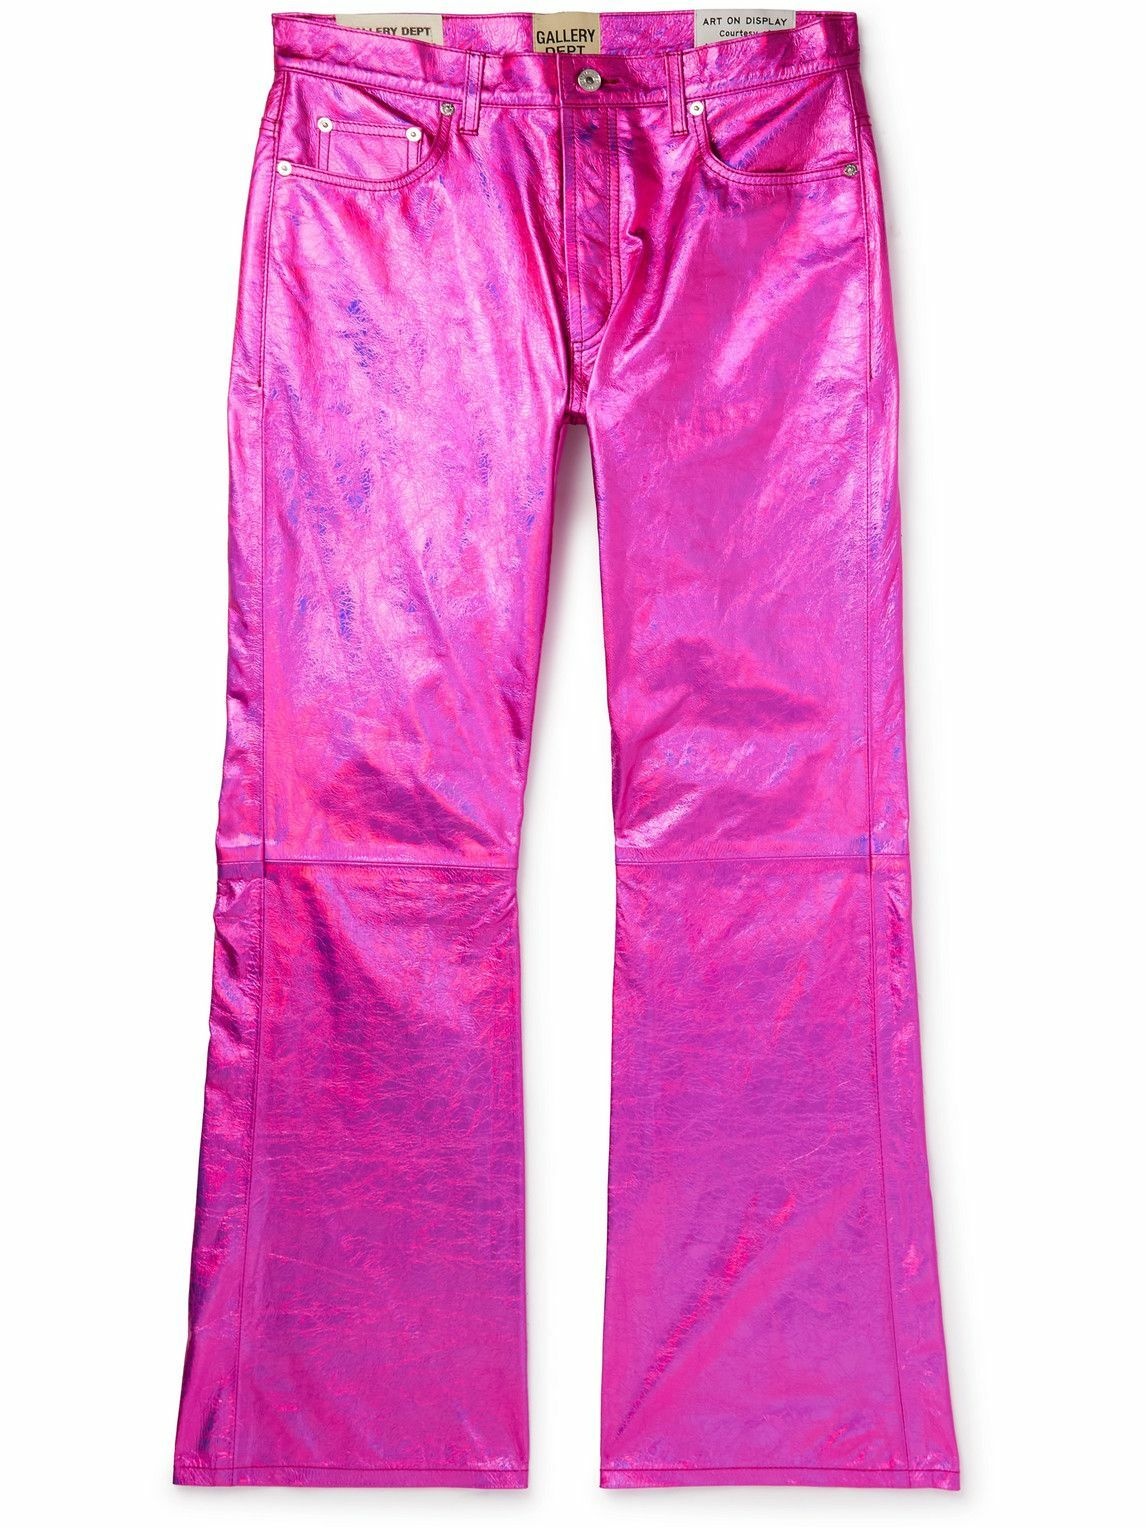 Photo: Gallery Dept. - Logan Galactic Flared Distressed Metallic Crinkled-Leather Trousers - Pink